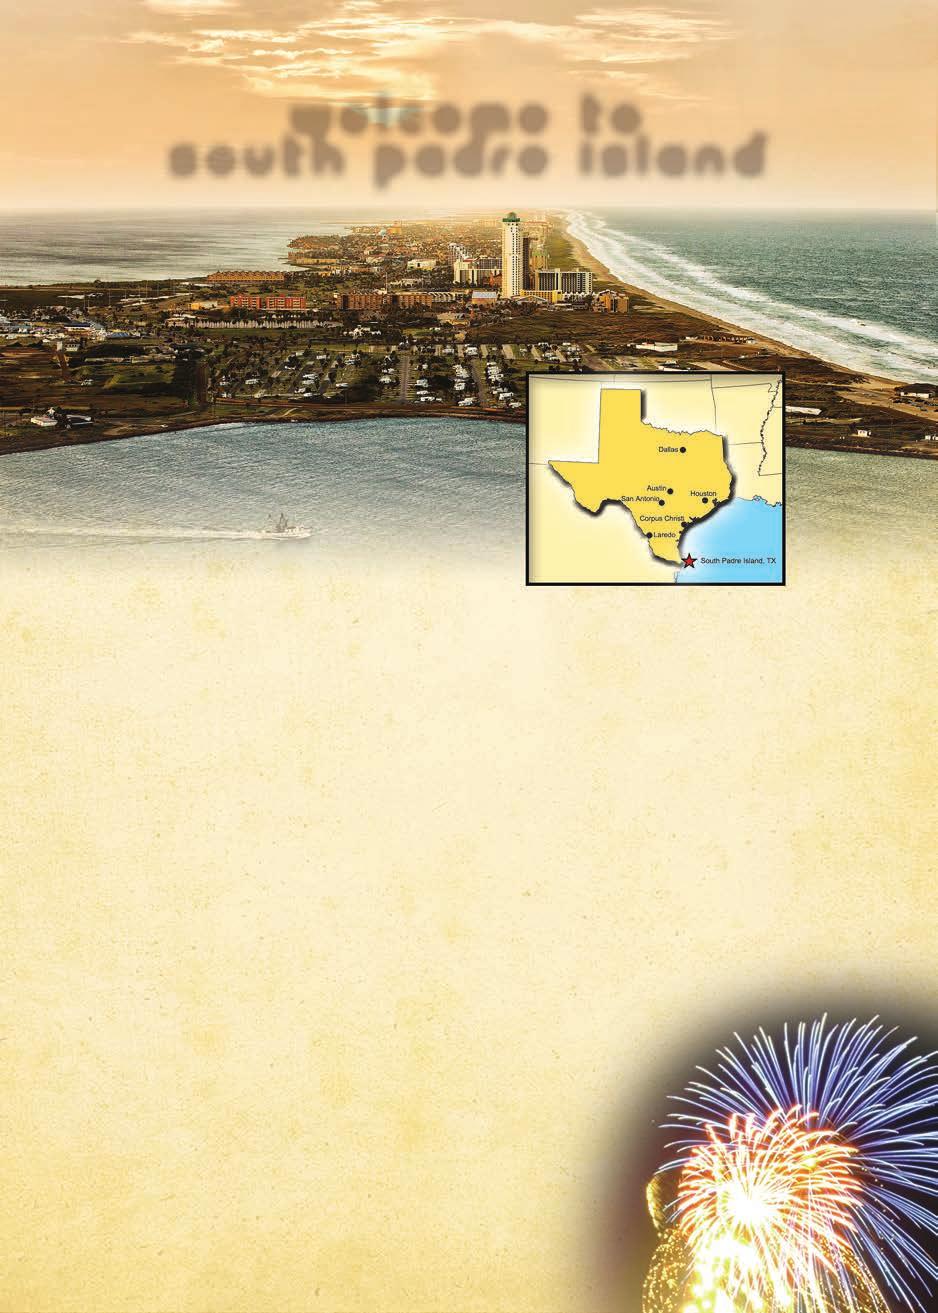 South Padre Island is situated on the southern tip of Texas.